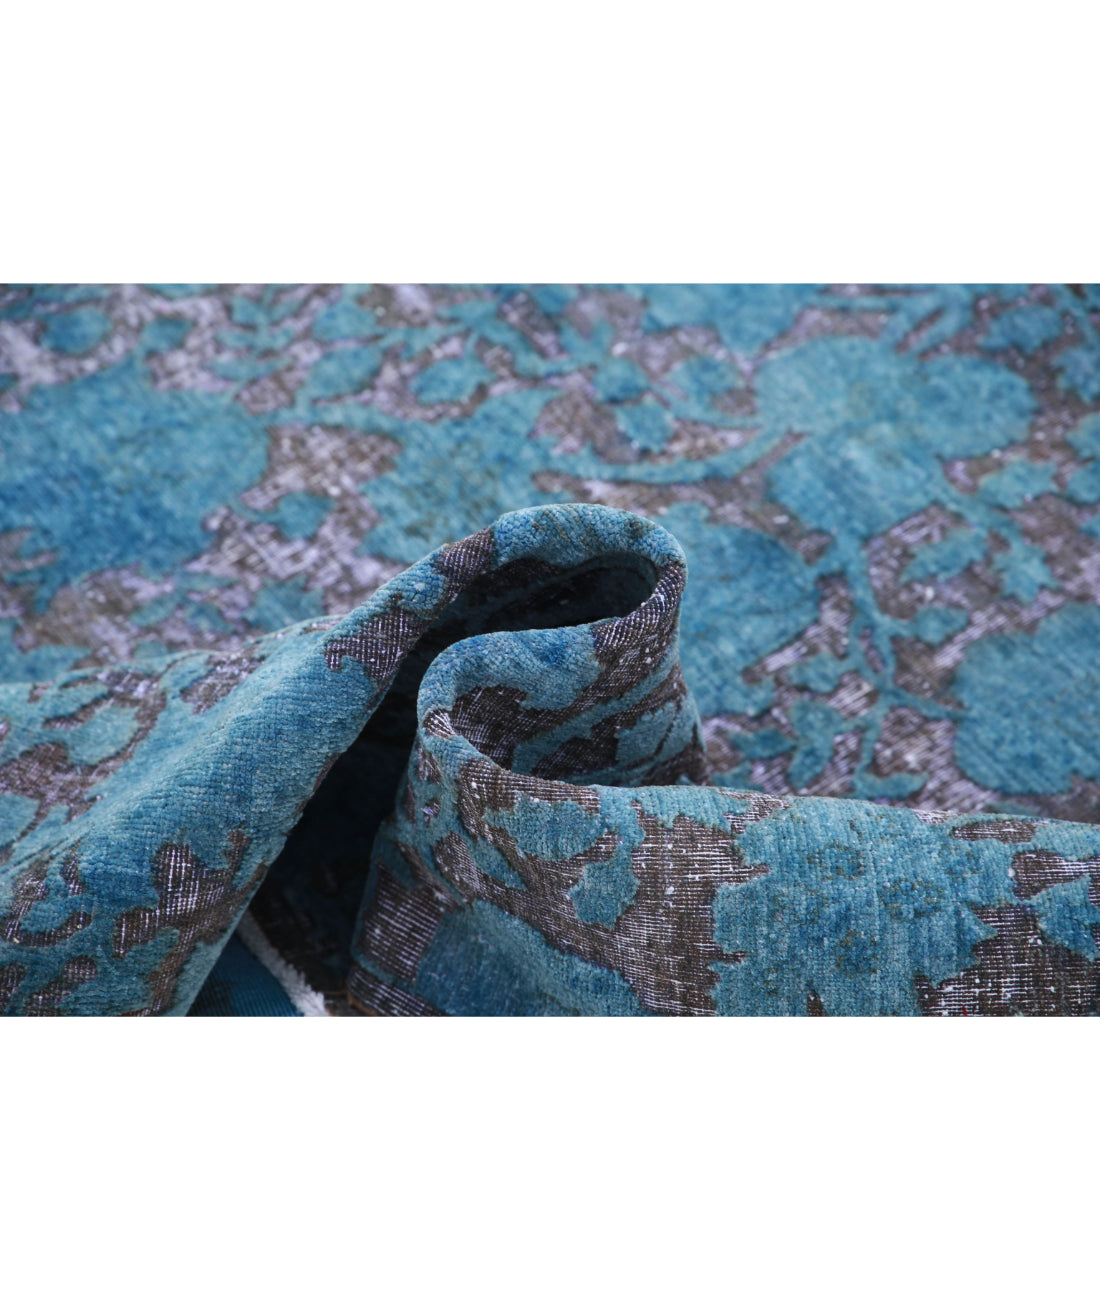 Hand Knotted Onyx Wool Rug - 6'0'' x 8'0'' 6'0'' x 8'0'' (180 X 240) / Blue / Charcoal